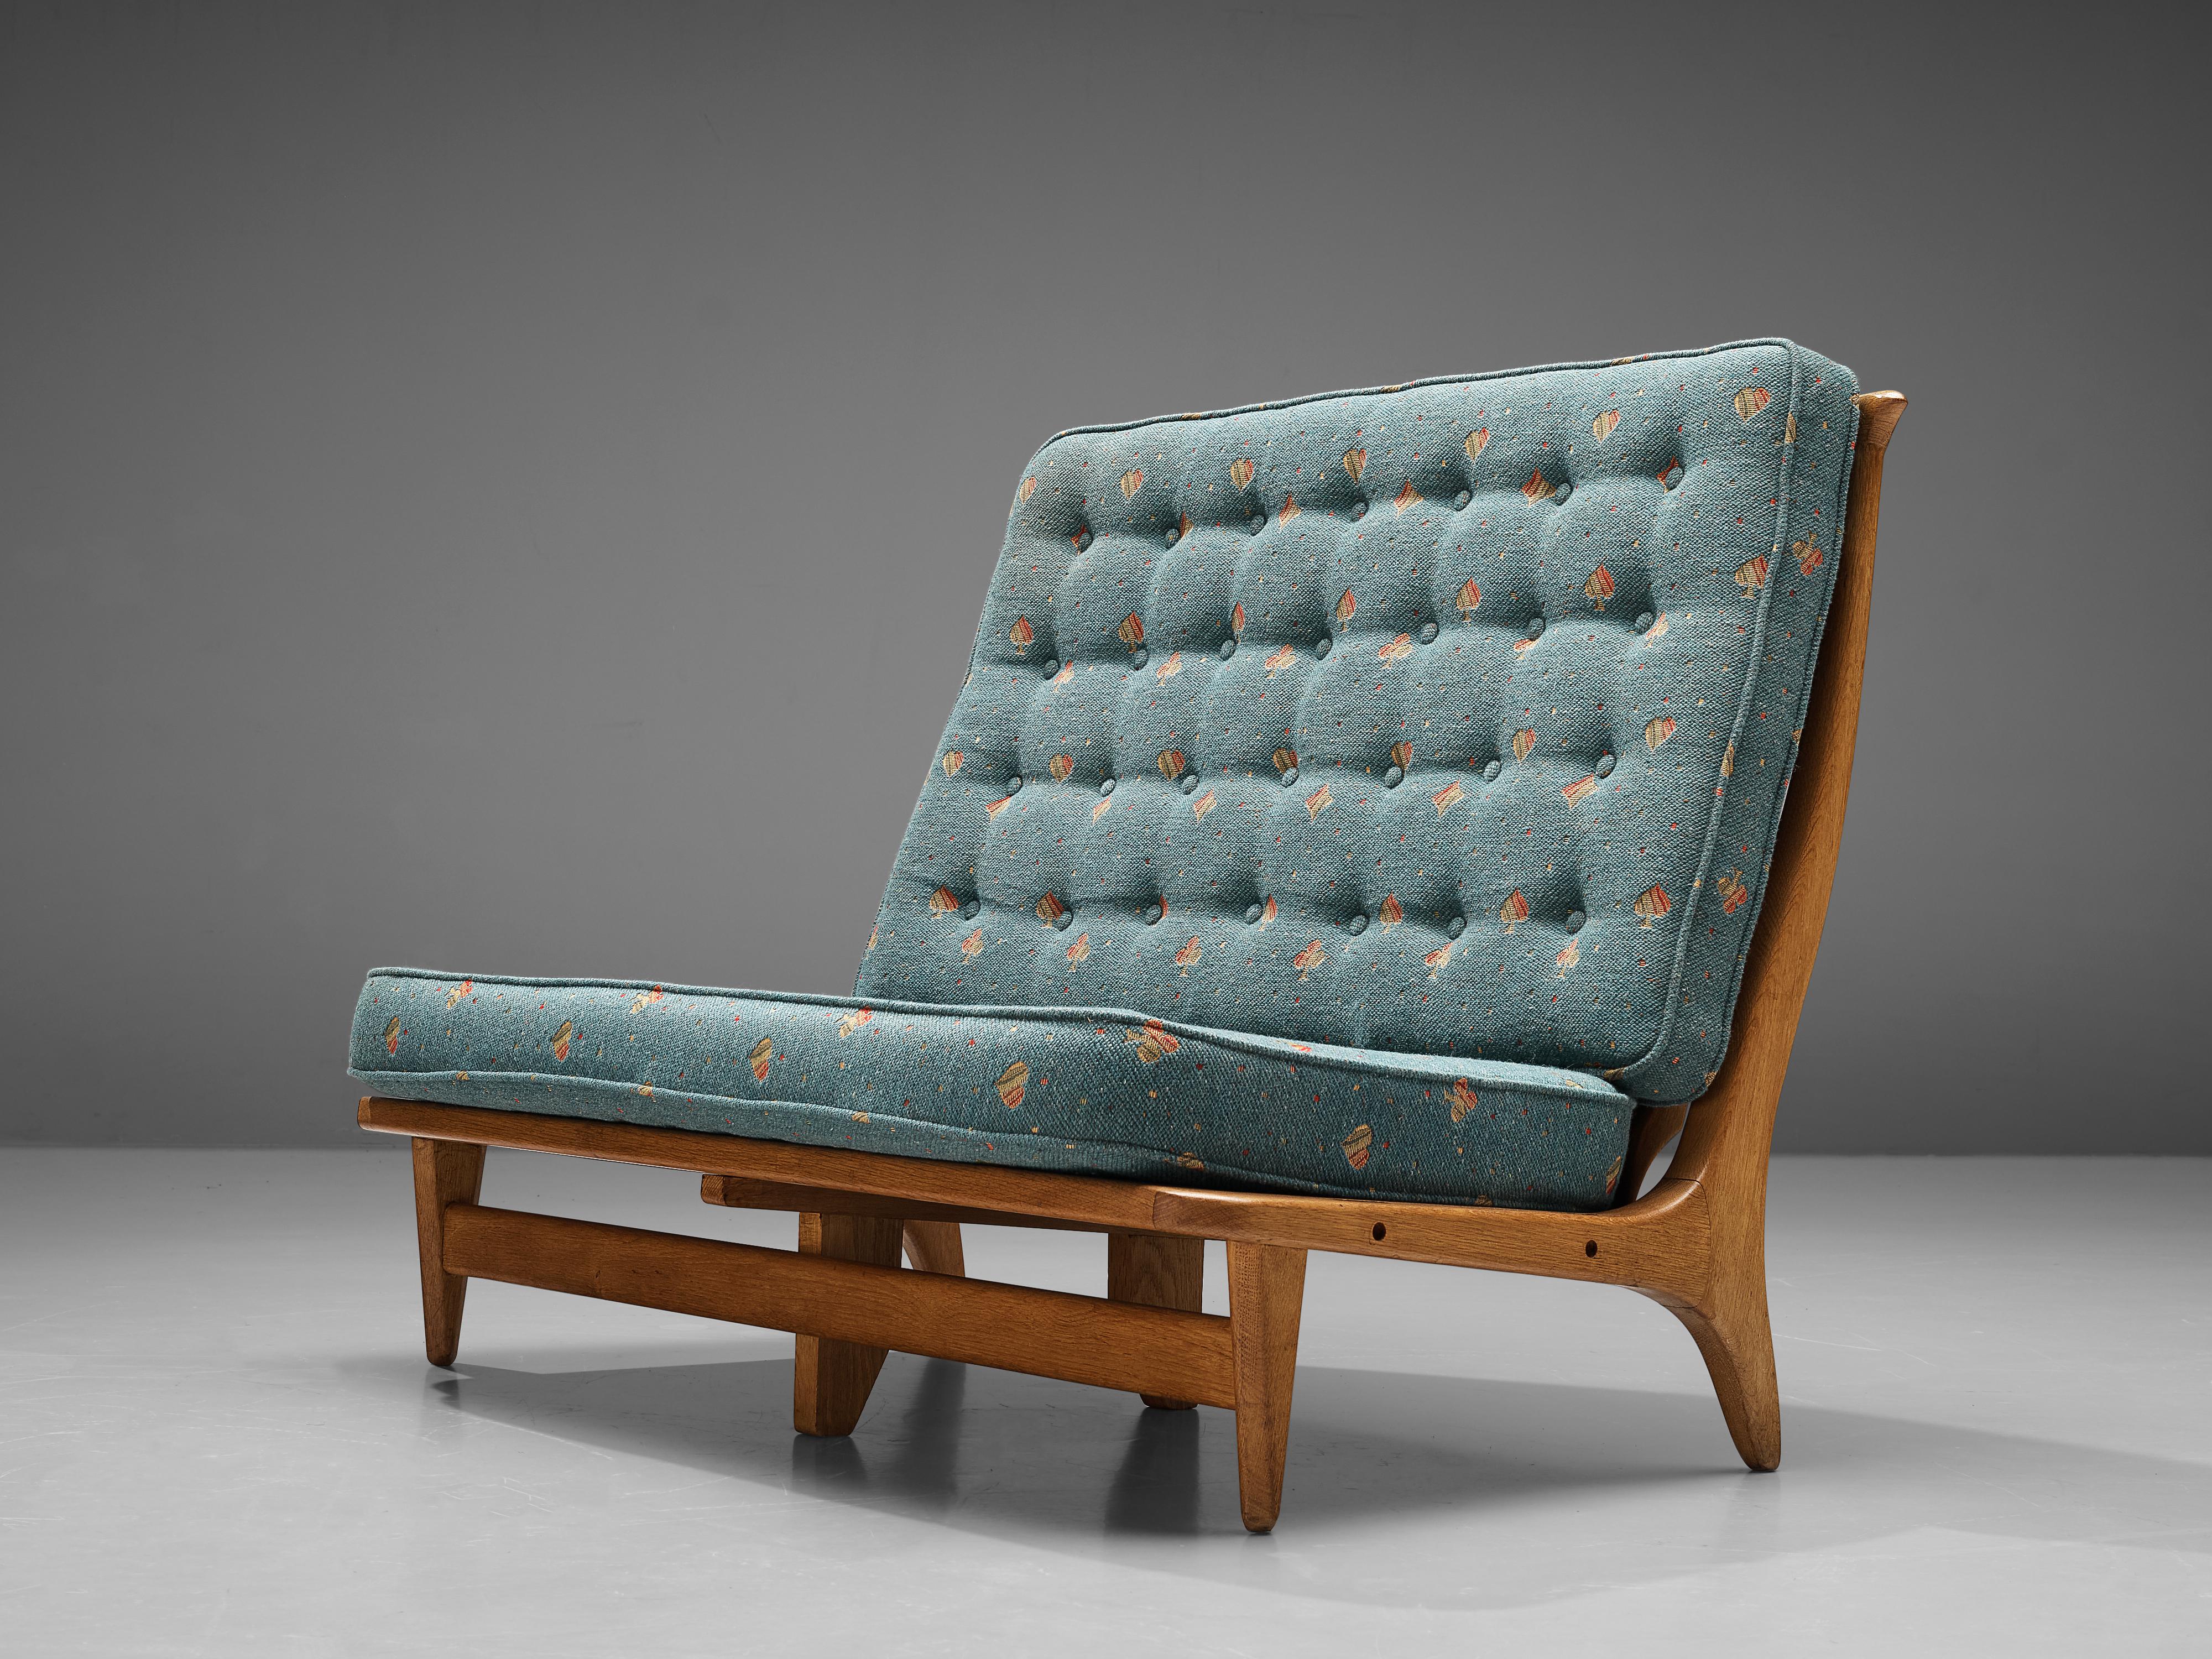 Guillerme & Chambron Sofa in Teal Upholstery  In Good Condition For Sale In Waalwijk, NL